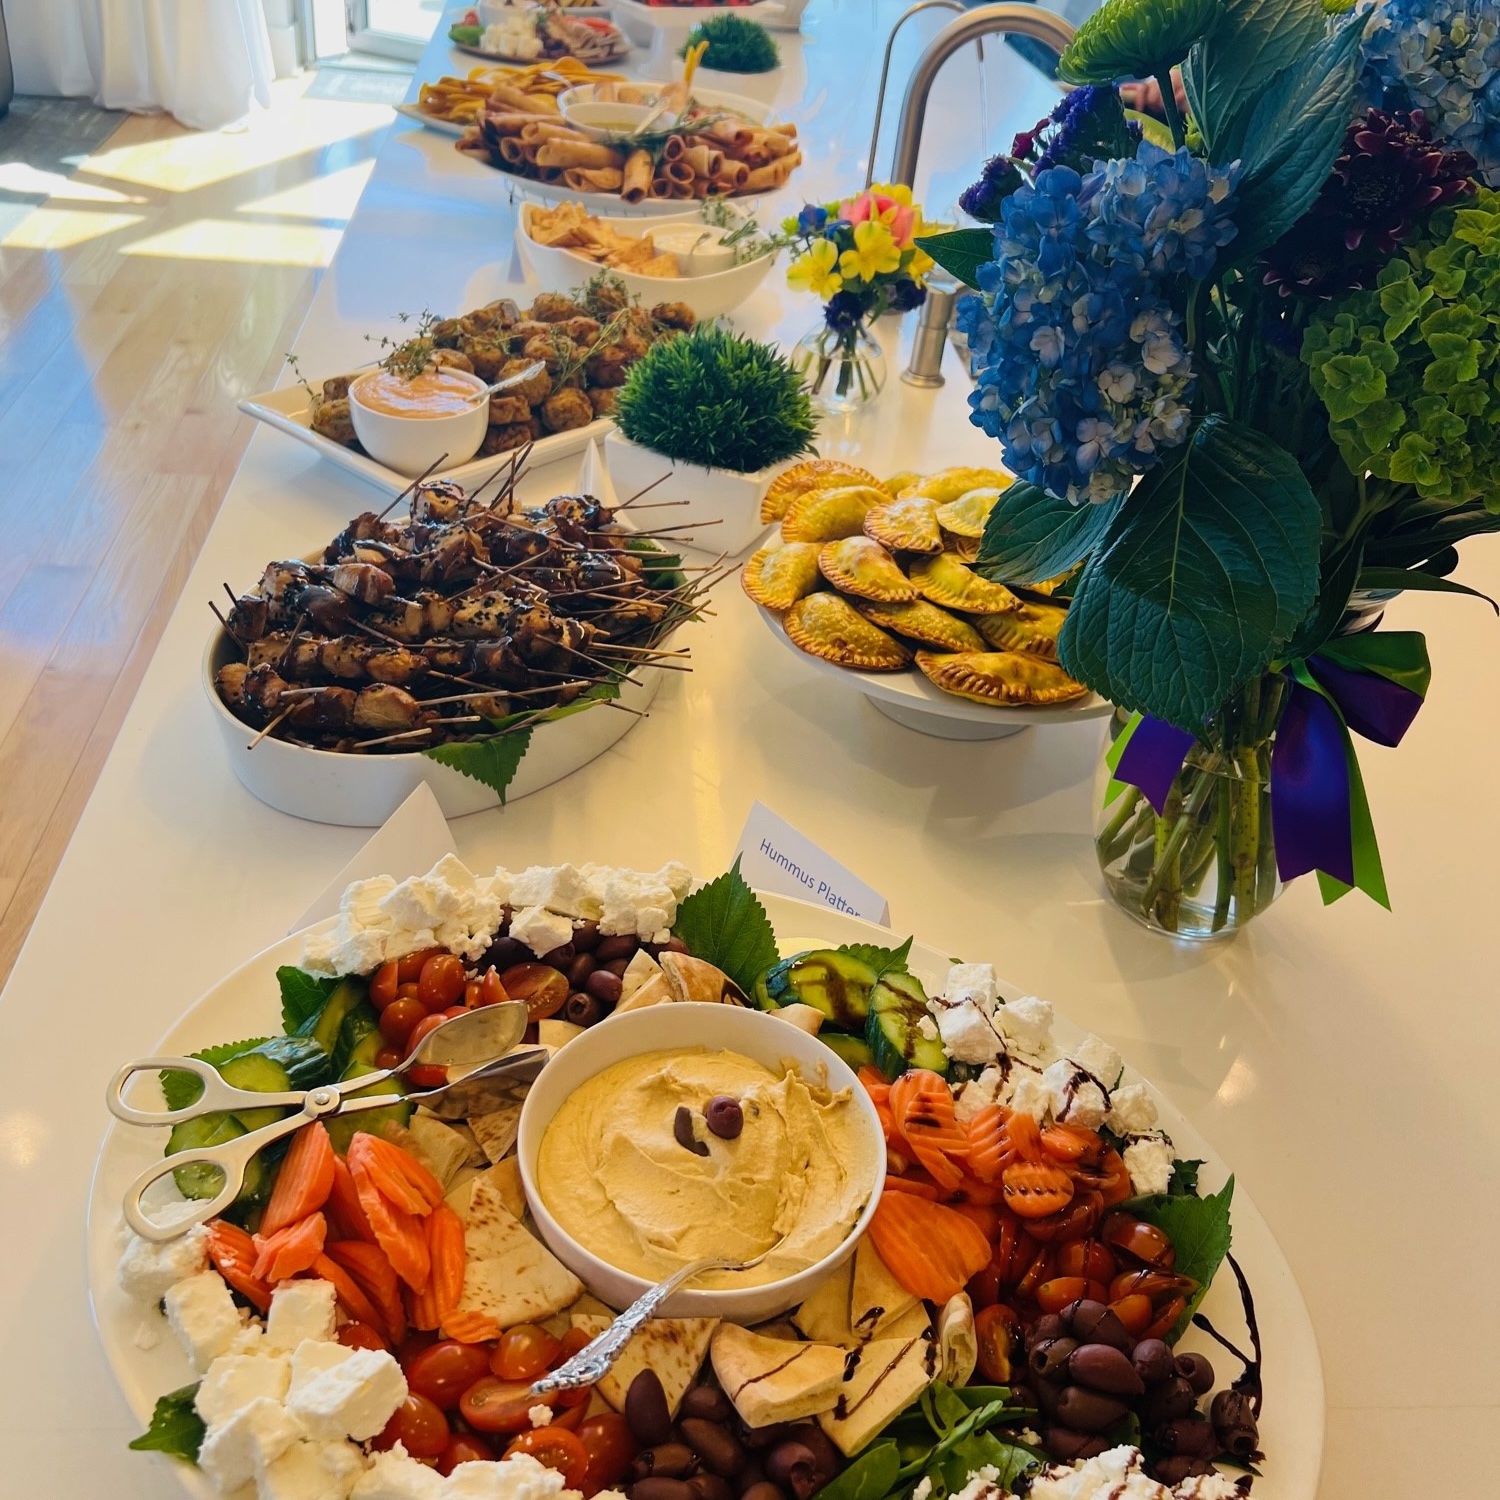 An event featuring a delicious array of hors d'oeuvres